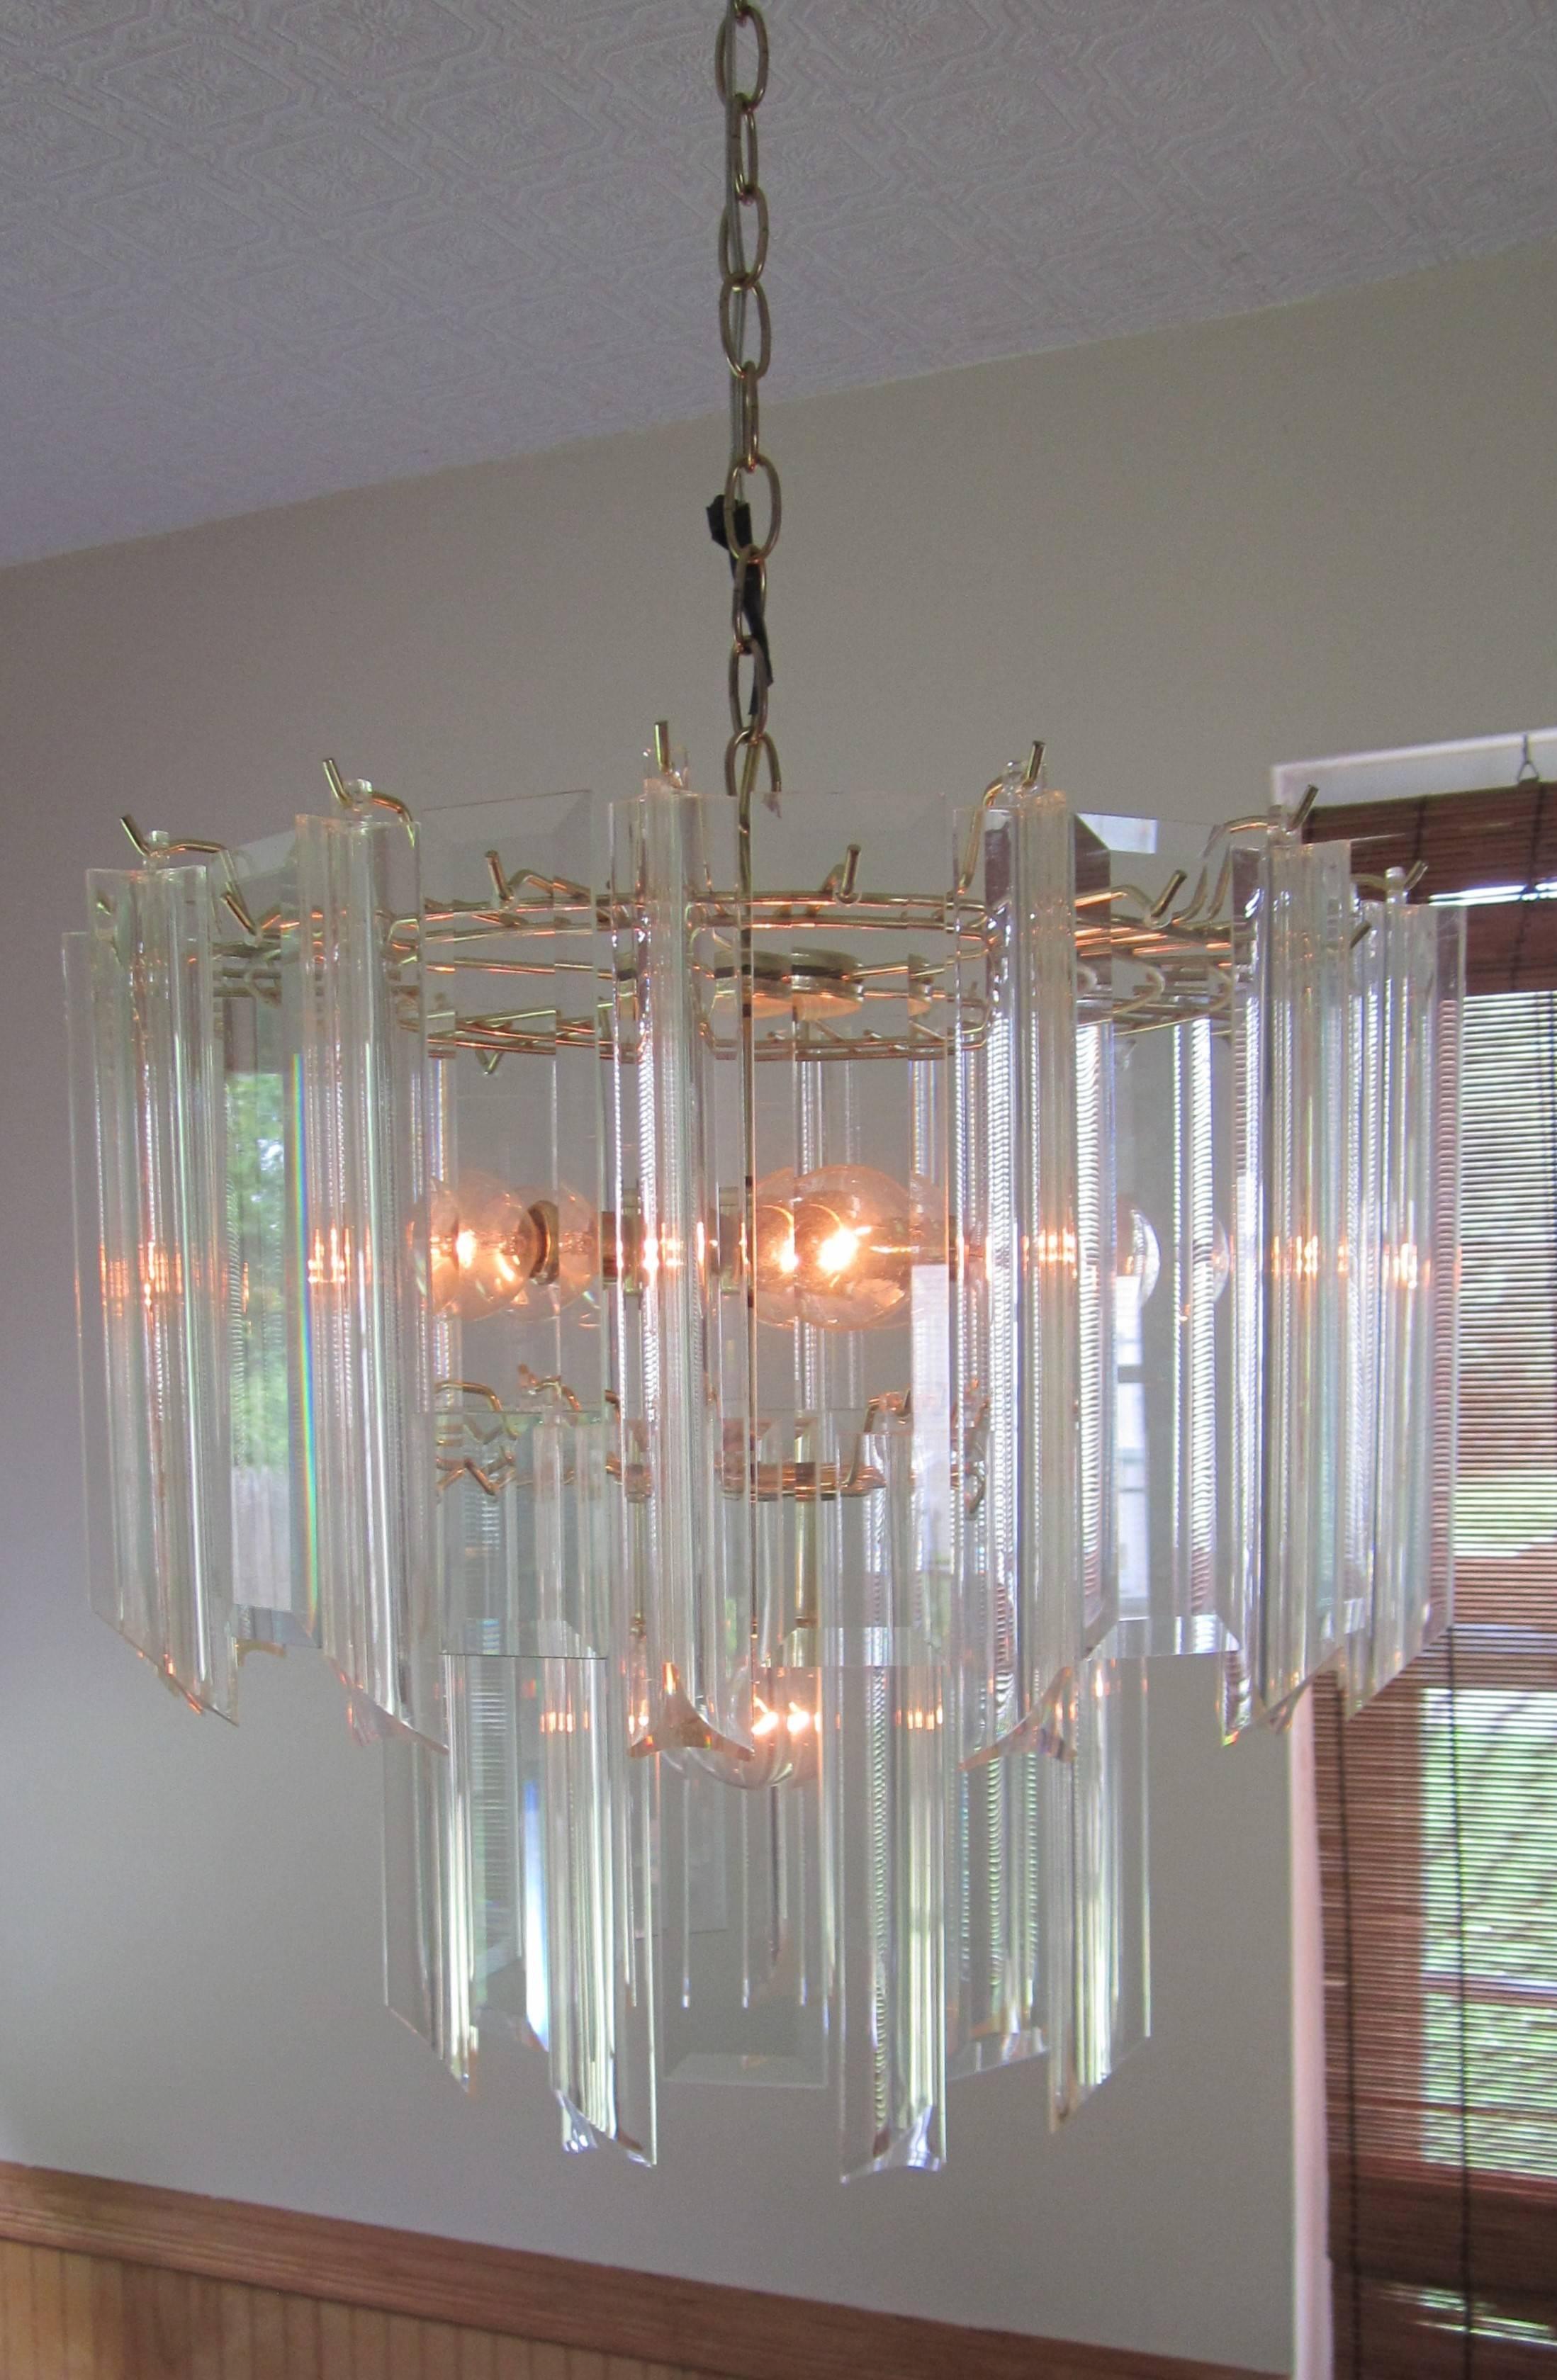 A '70s Lucite/acrylic and crystal combination, six-light, two-tier, chandelier on a brass plated metal frame. Chandelier is in the style of designer Charles Hollis Jones, circa 1960-1970s. 

Gold giltwood 'bamboo' mirror shown in image #6 also